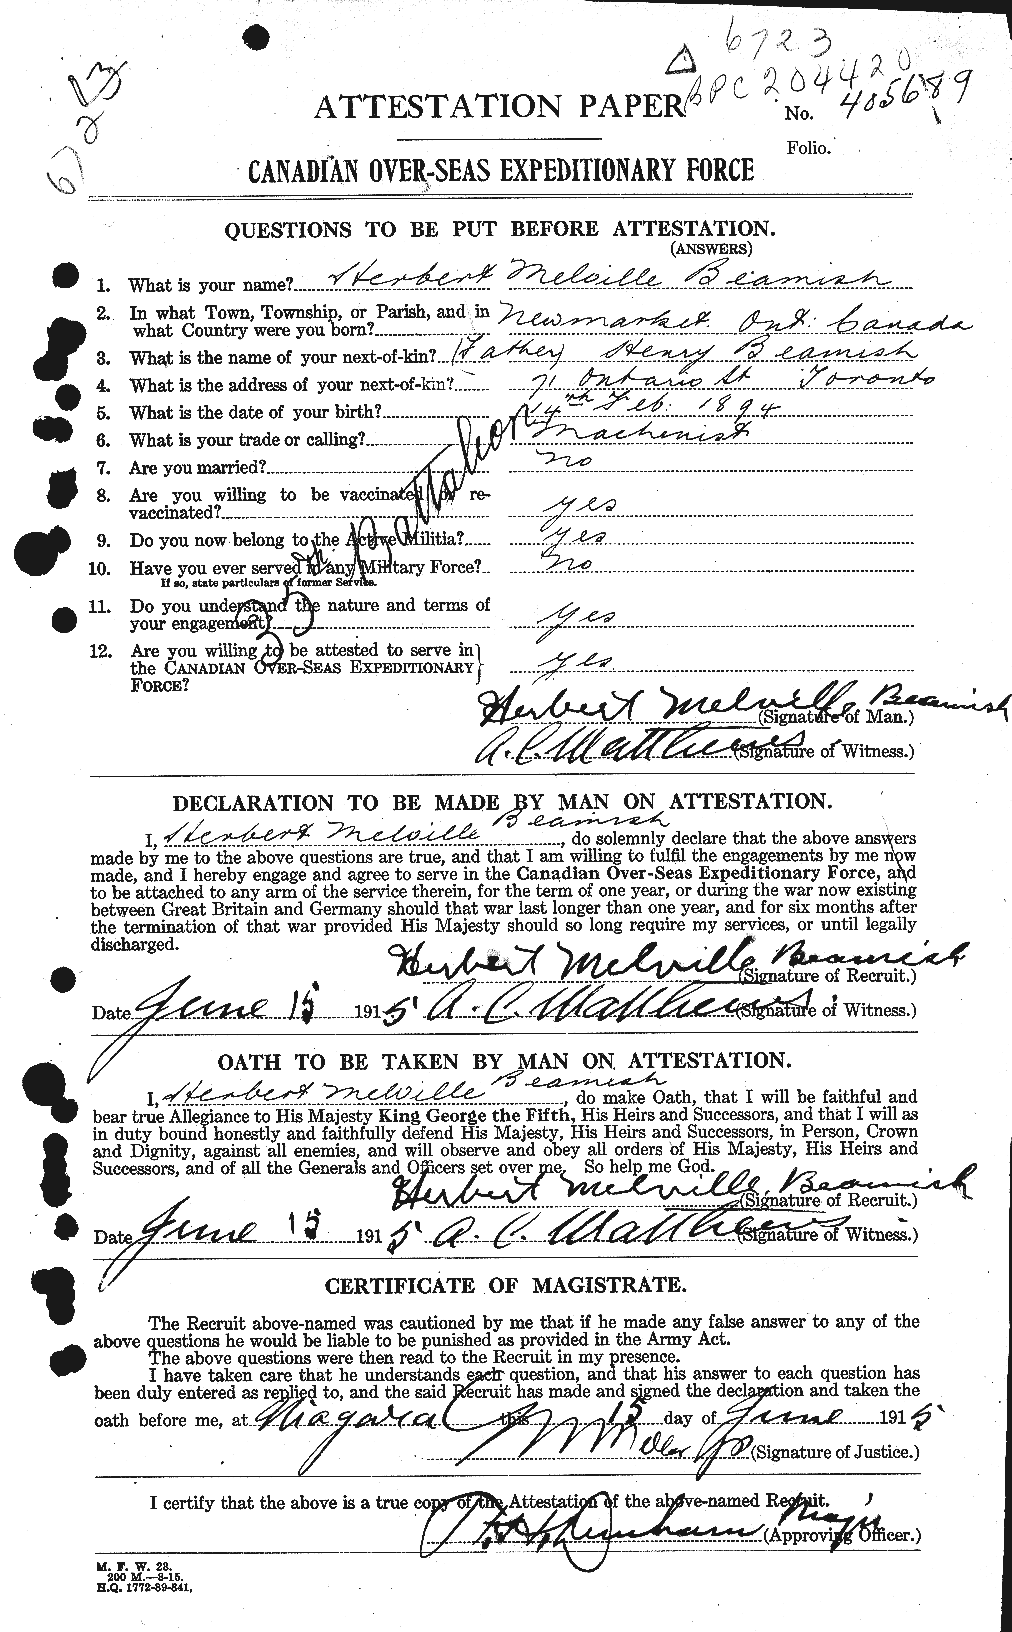 Personnel Records of the First World War - CEF 235457a